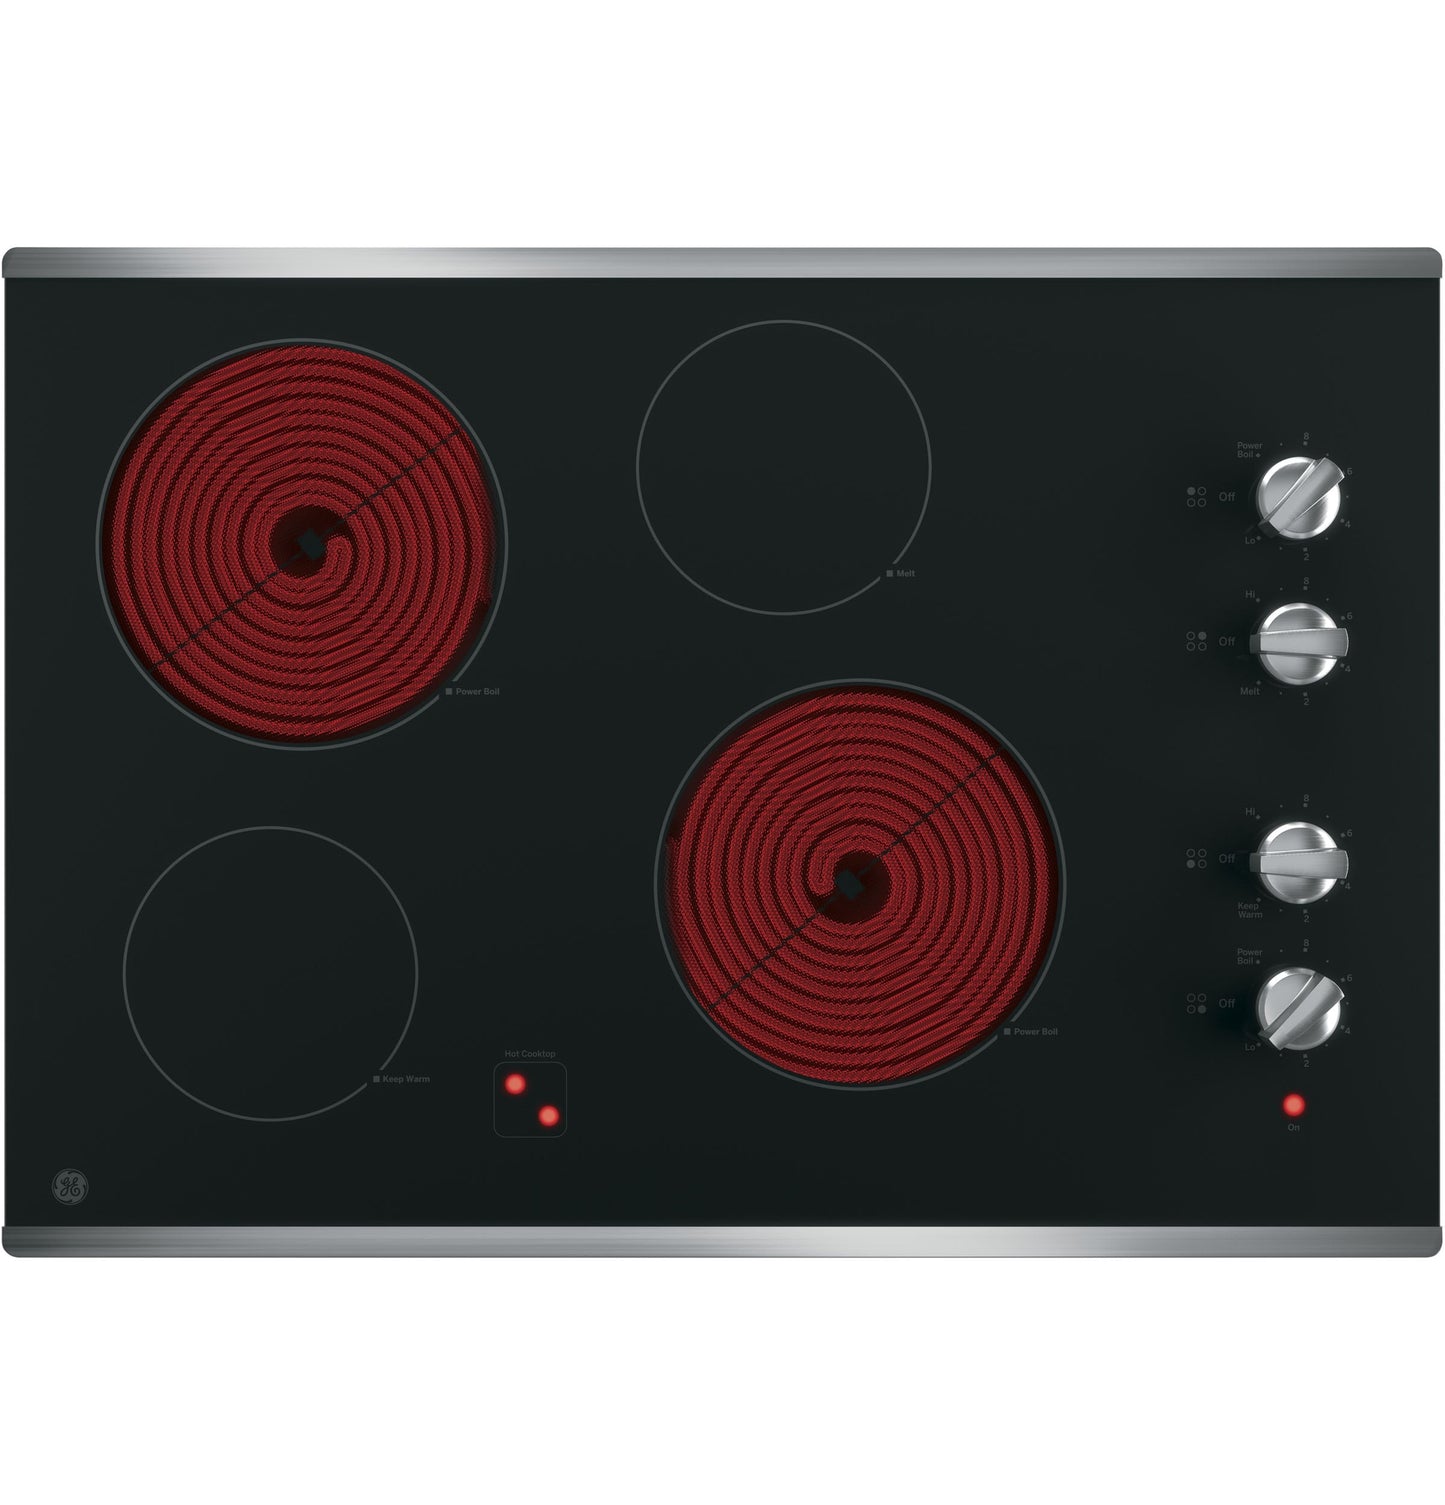 OPEN BOX GE 30-in Electric Cooktop and 30-in Smart Convection Single Wall Oven paired with 1.7 Cu Ft Over-the-Range Microwave Suite in Stainless Steel